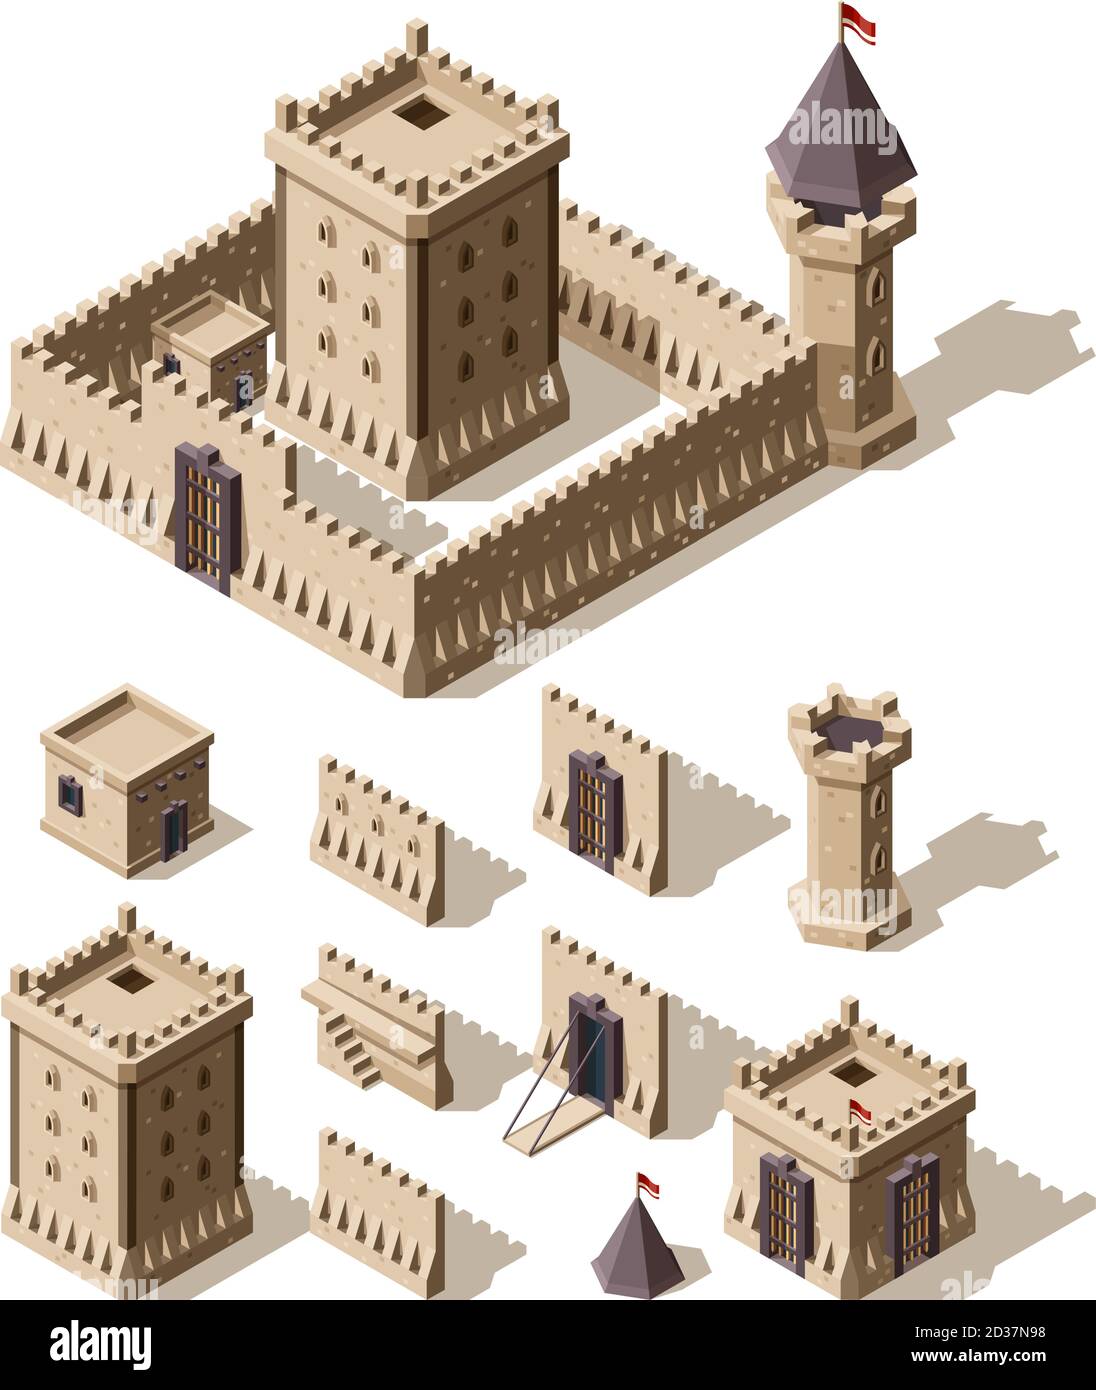 Castles isometric. Creation kit of medieval buildings walls gates towers of ancient castles vector architectural assets for games Stock Vector